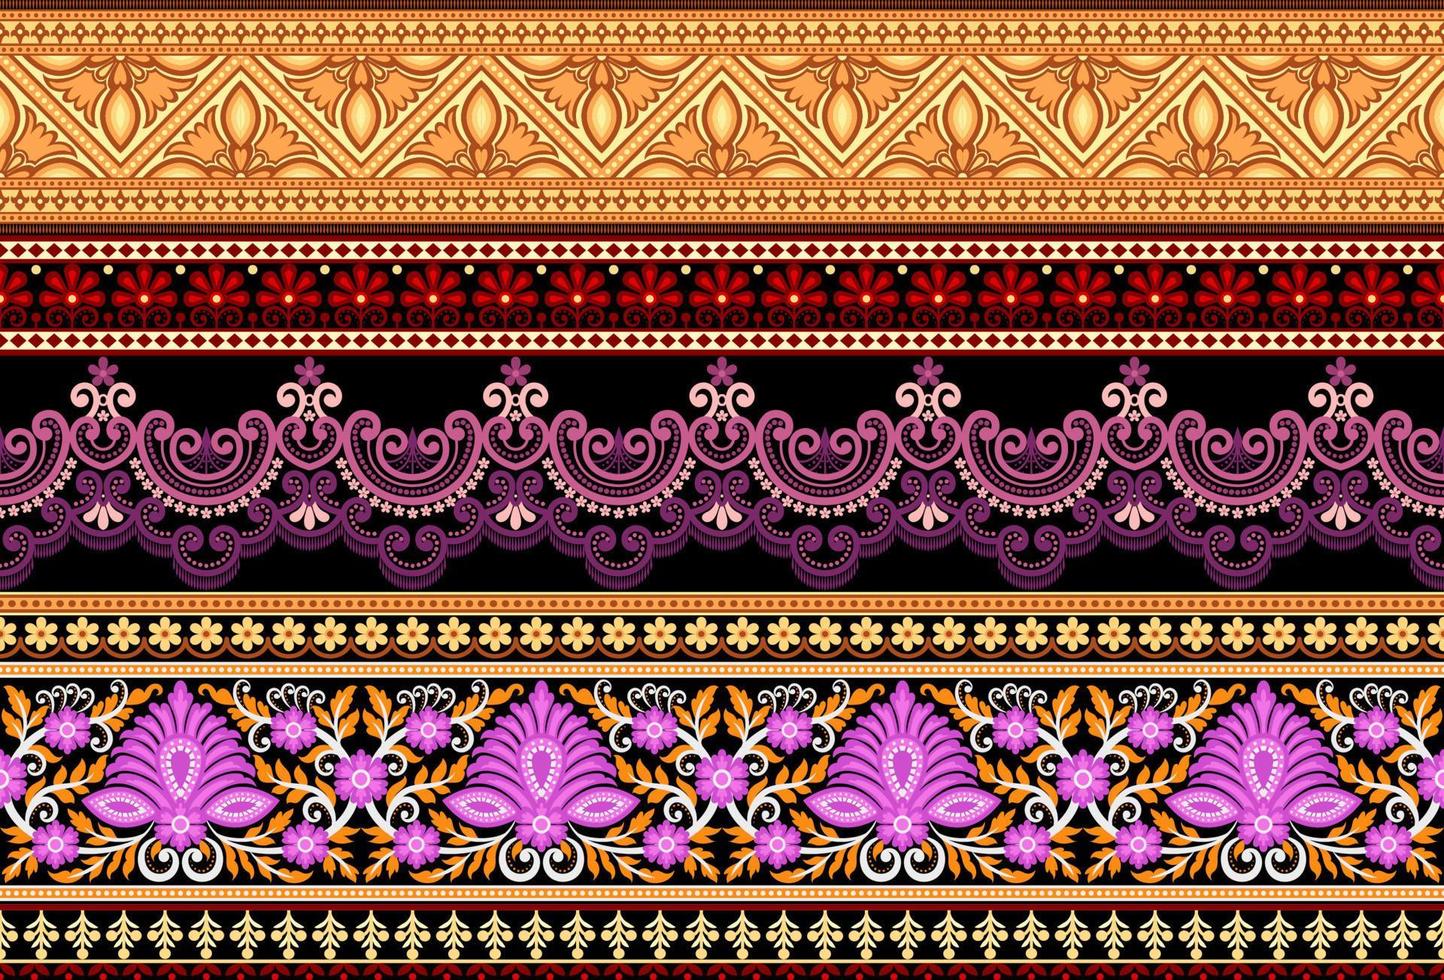 Set Ethnic Seamless borders and flower ornament, motif draws working illustration flowers and  ornament motif India design elements Neckline pattern or, repeat the floral texture vector